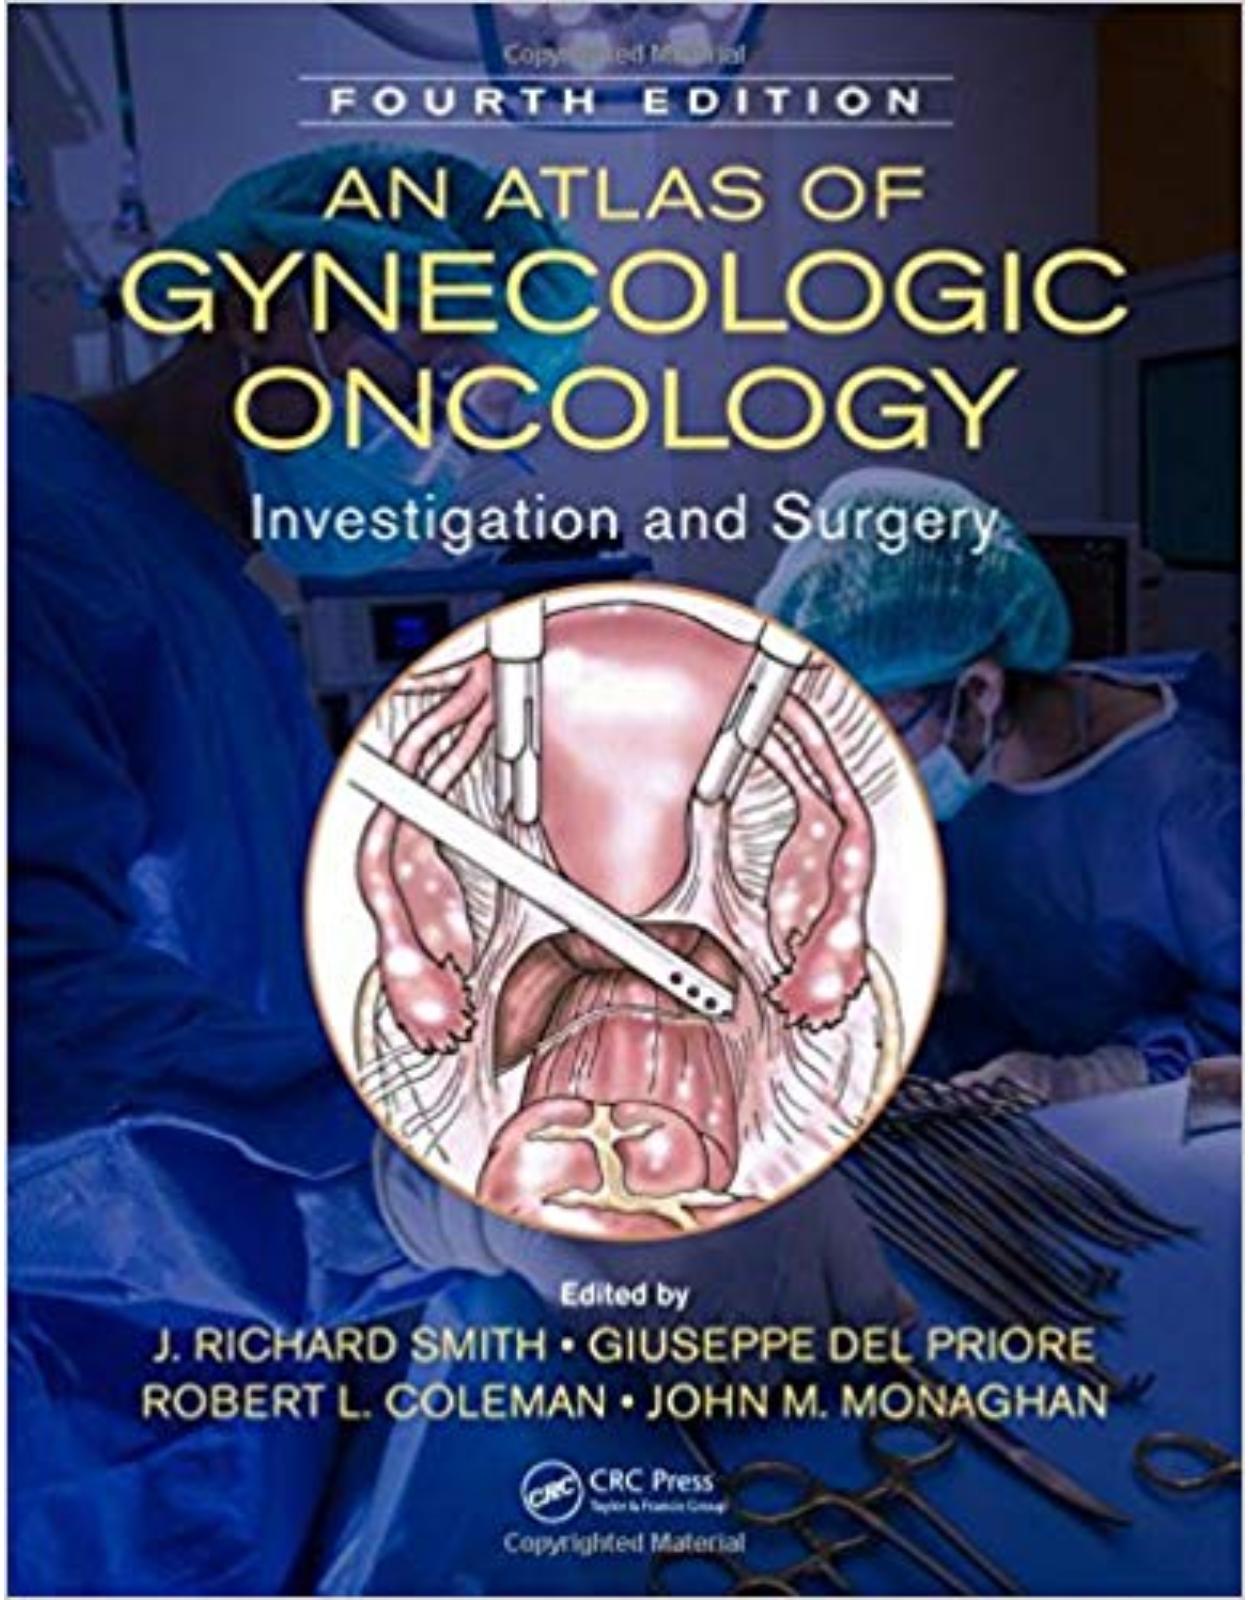 An Atlas of Gynecologic Oncology: Investigation and Surgery, Fourth Edition